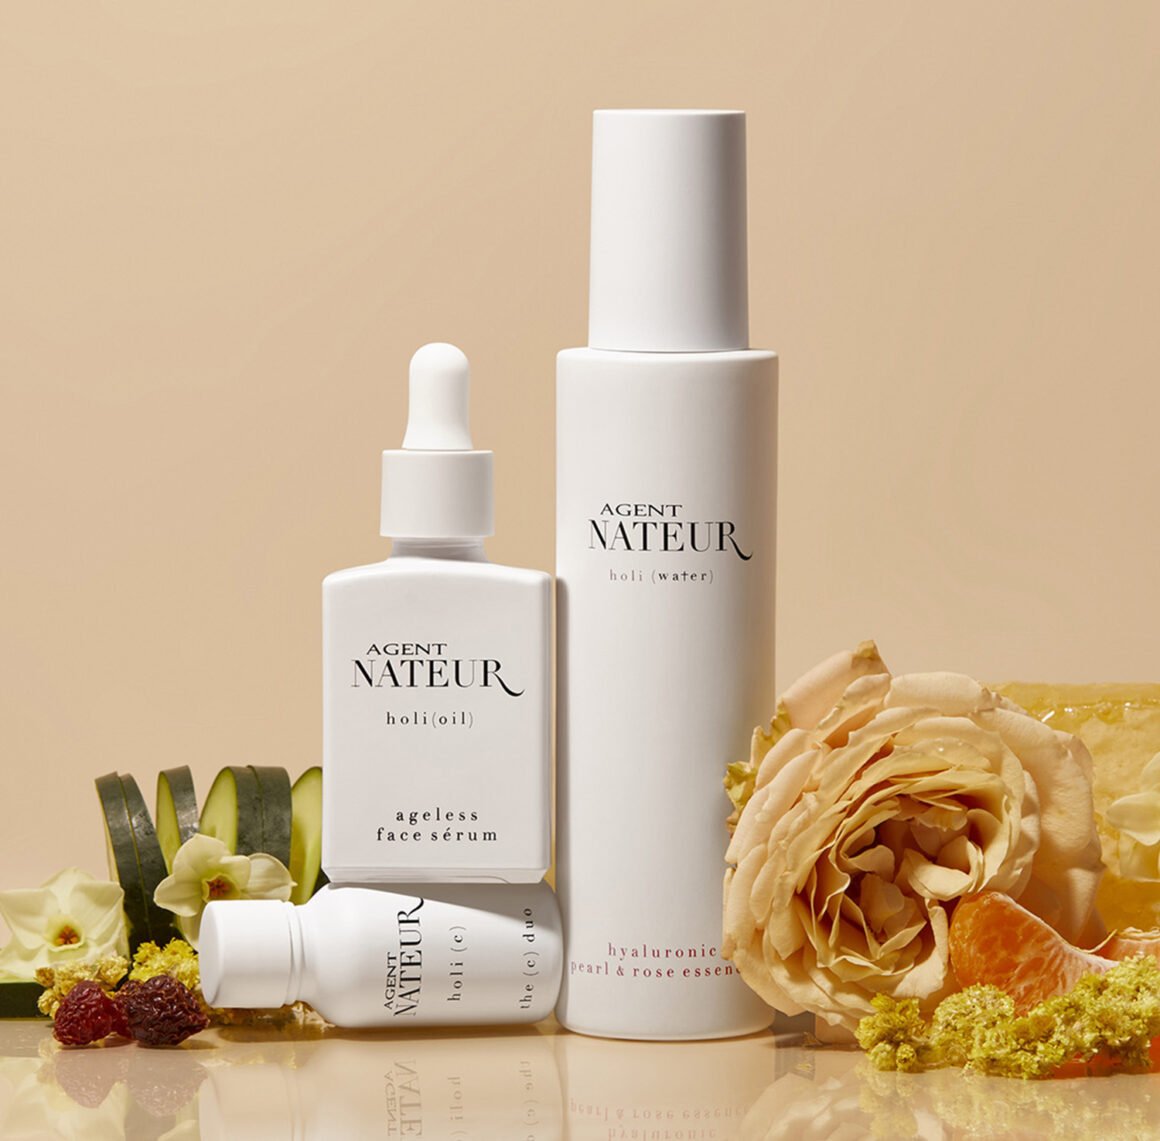 Shop Agent Nateur at Inspire Beauty, luxurious skin and body care product made with the finest natural ingredients.